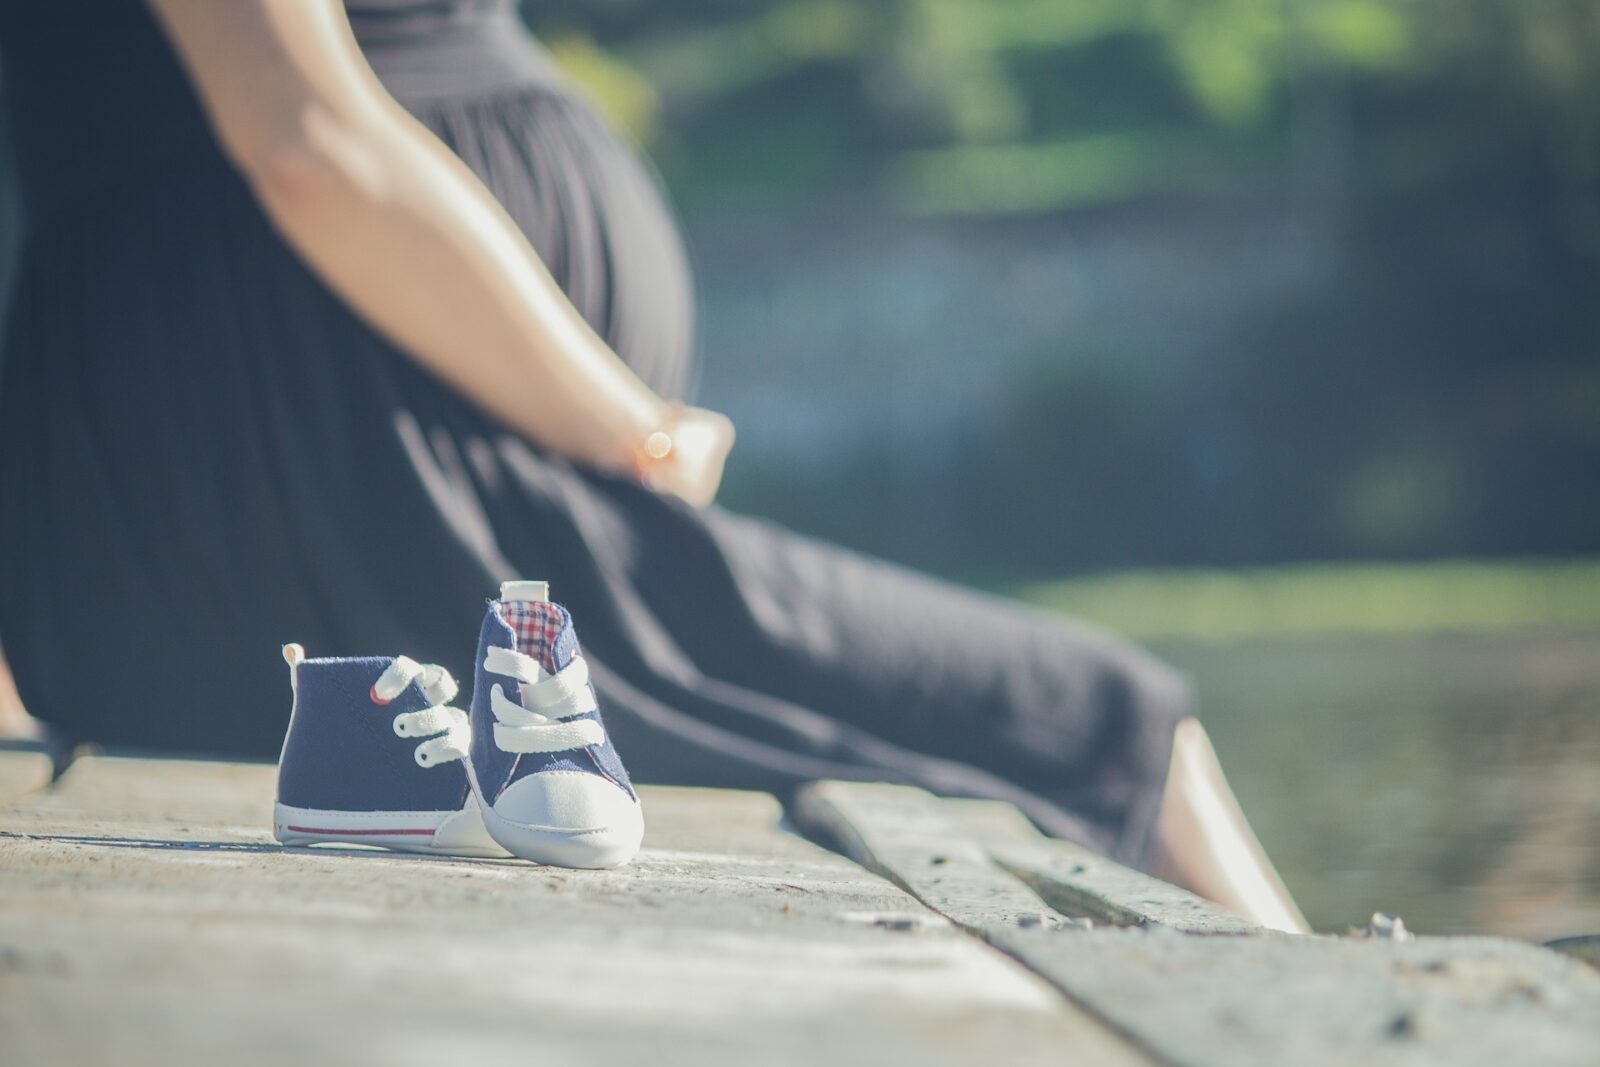 Webinar: How prenatal and postnatal exposure to PFAS affects child cardiometabolic health and inflammatory biomarkers – six European cohorts